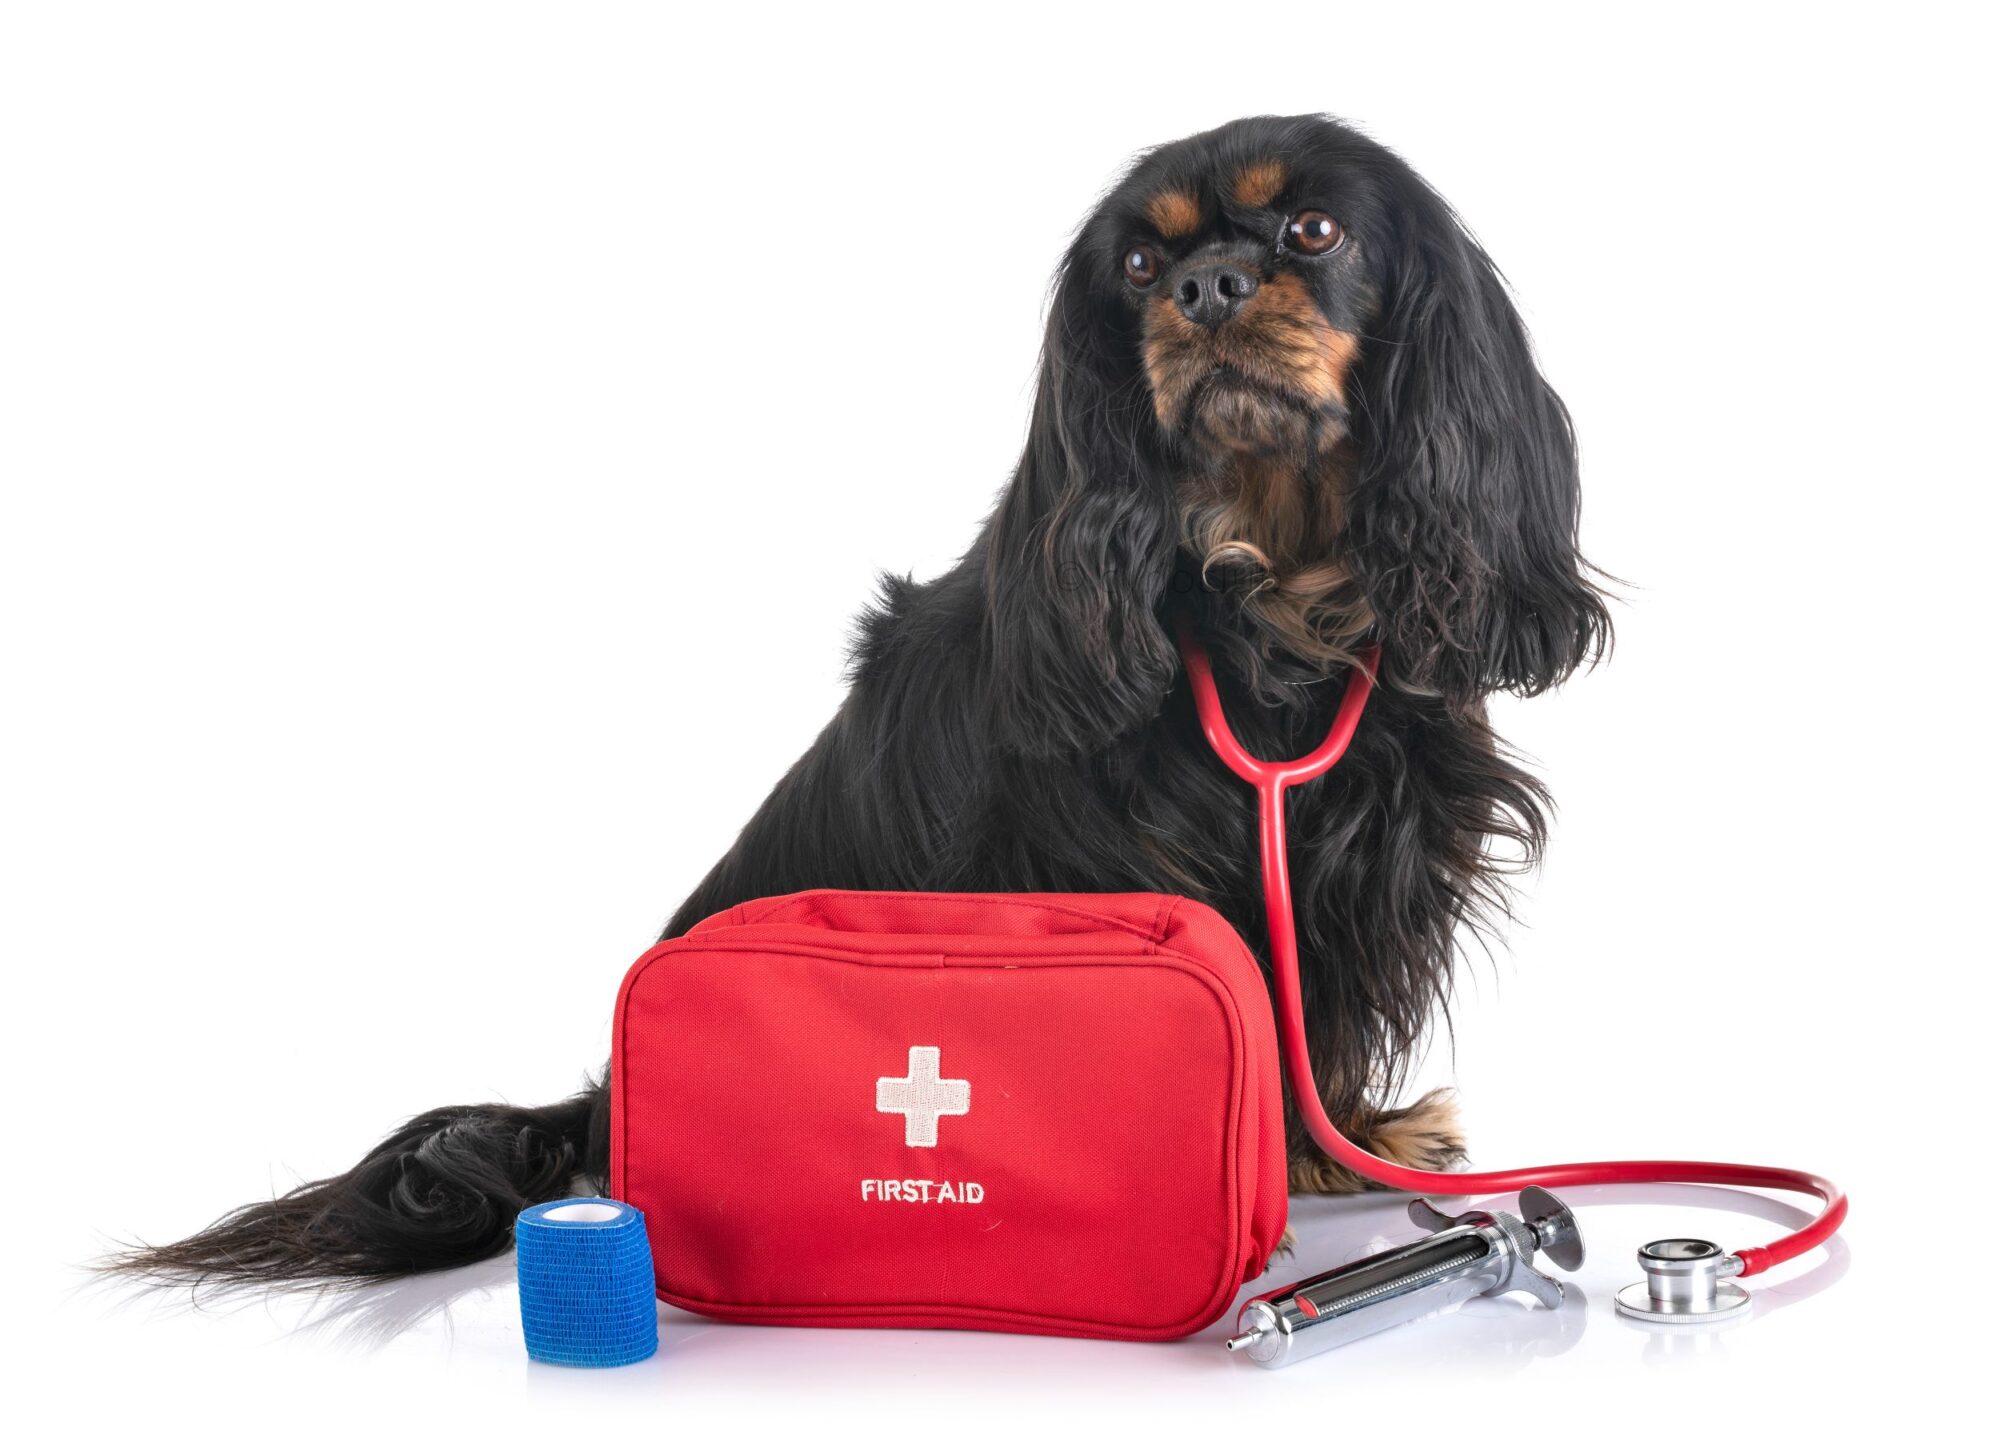 Dog with first-aid kit.